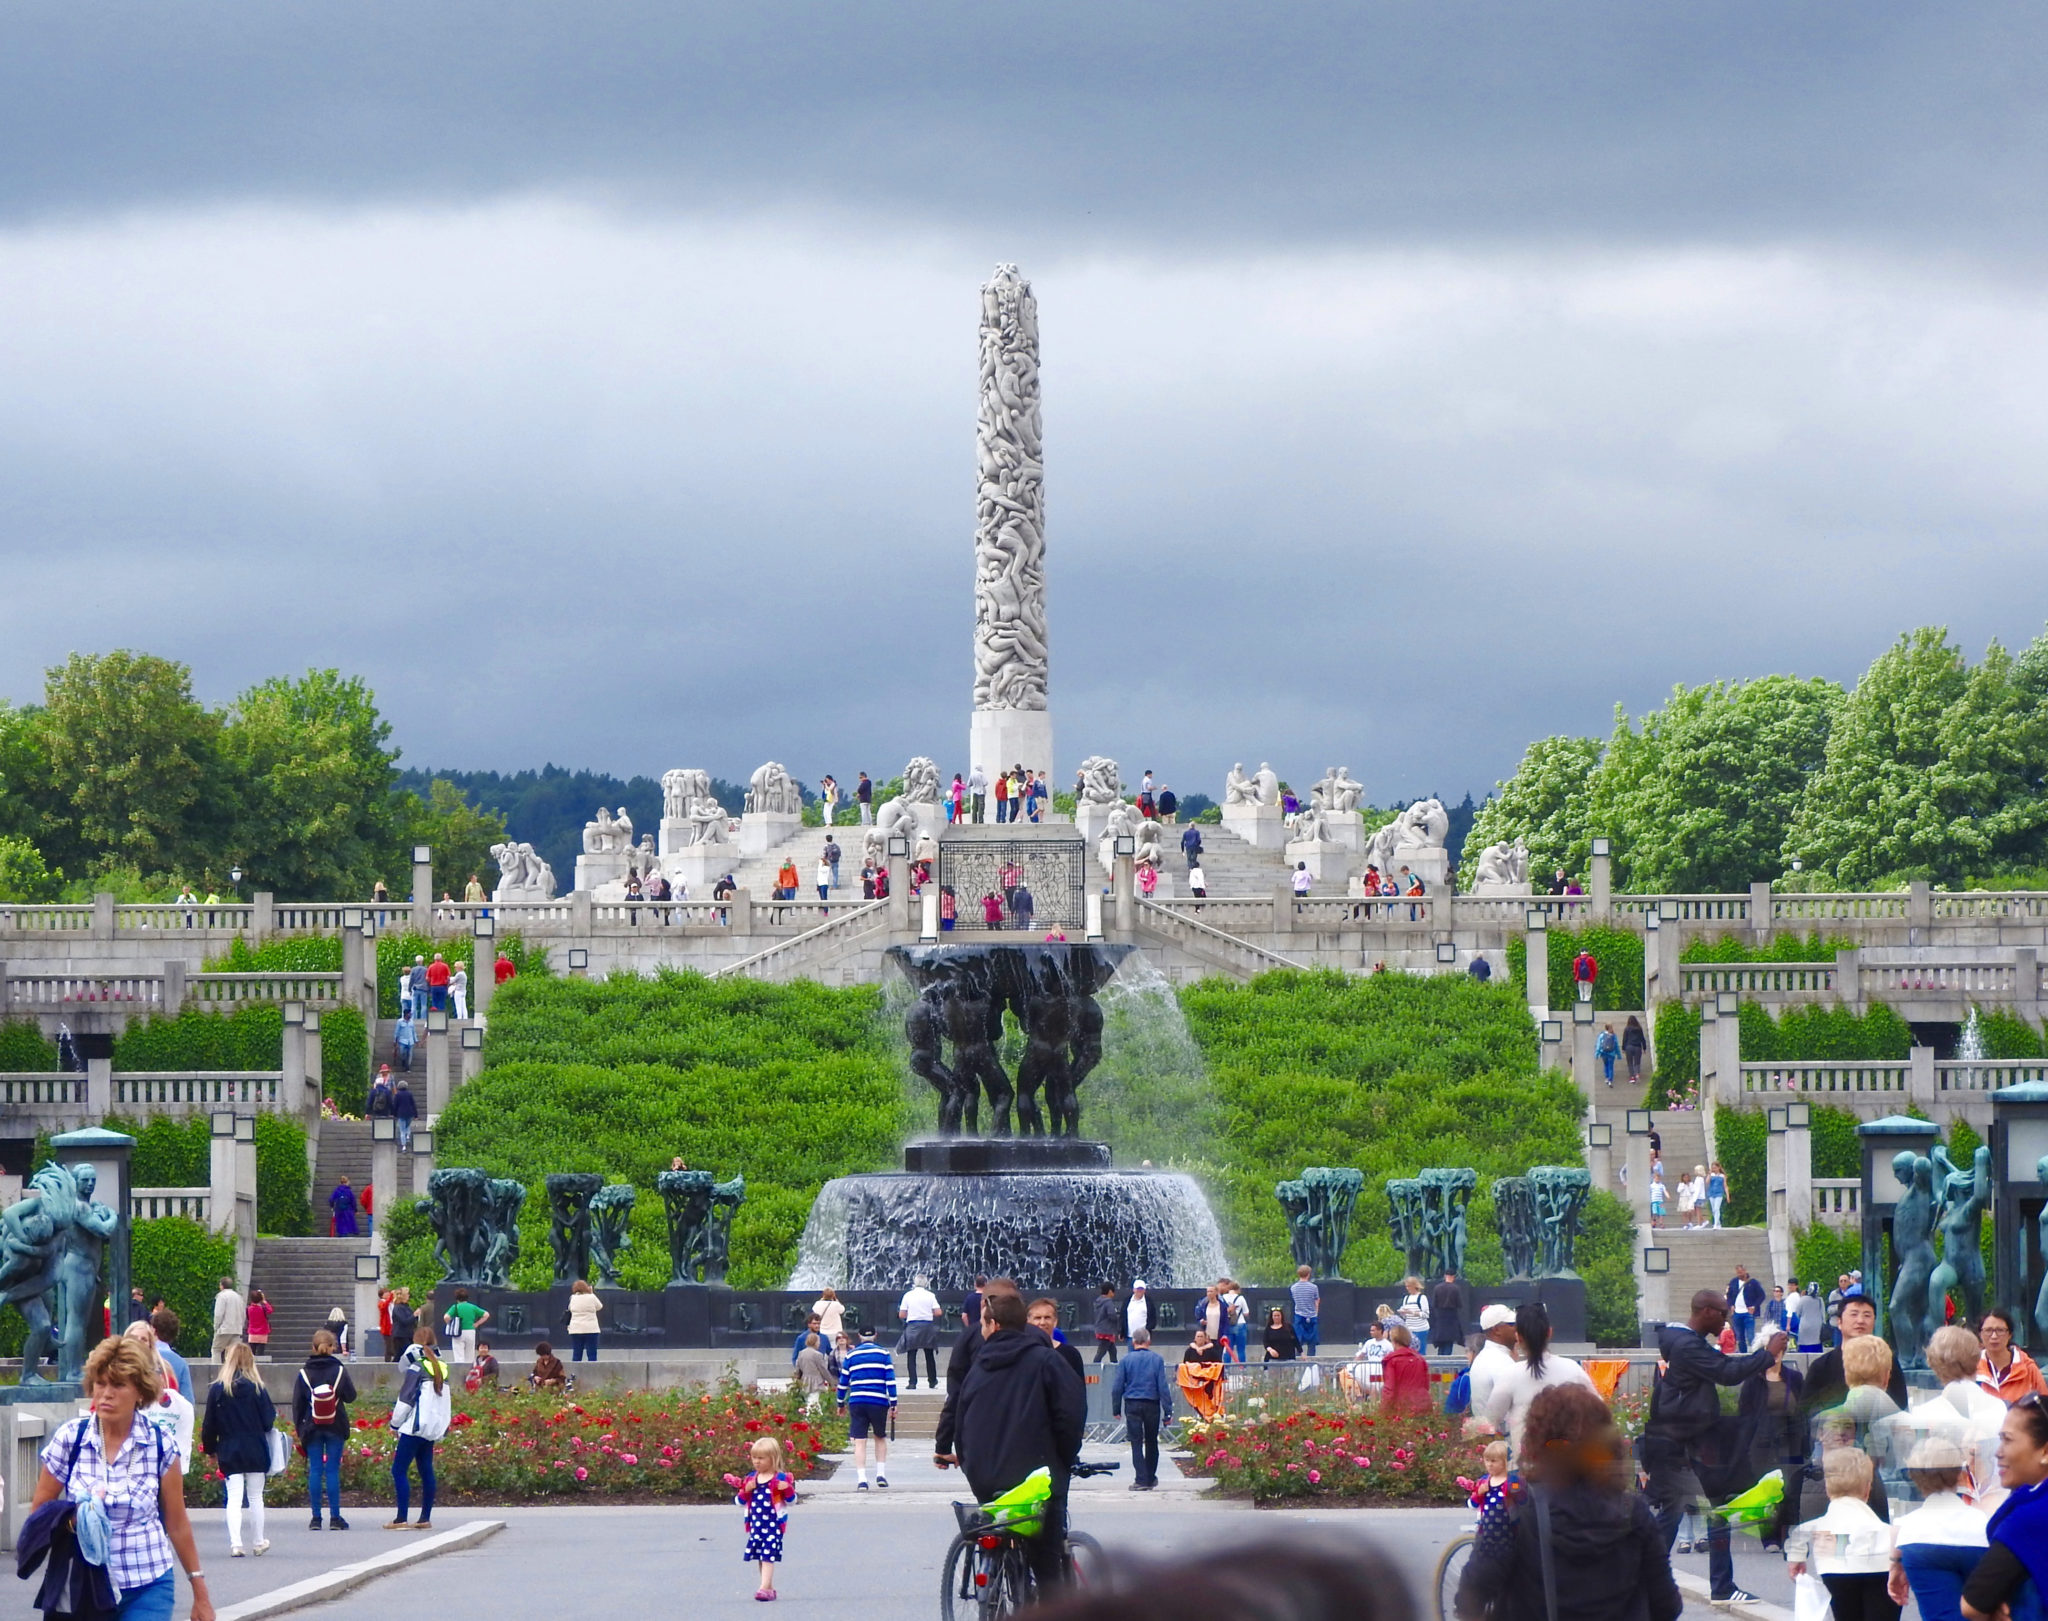 Frogner park, view of fountain and monolith from afar